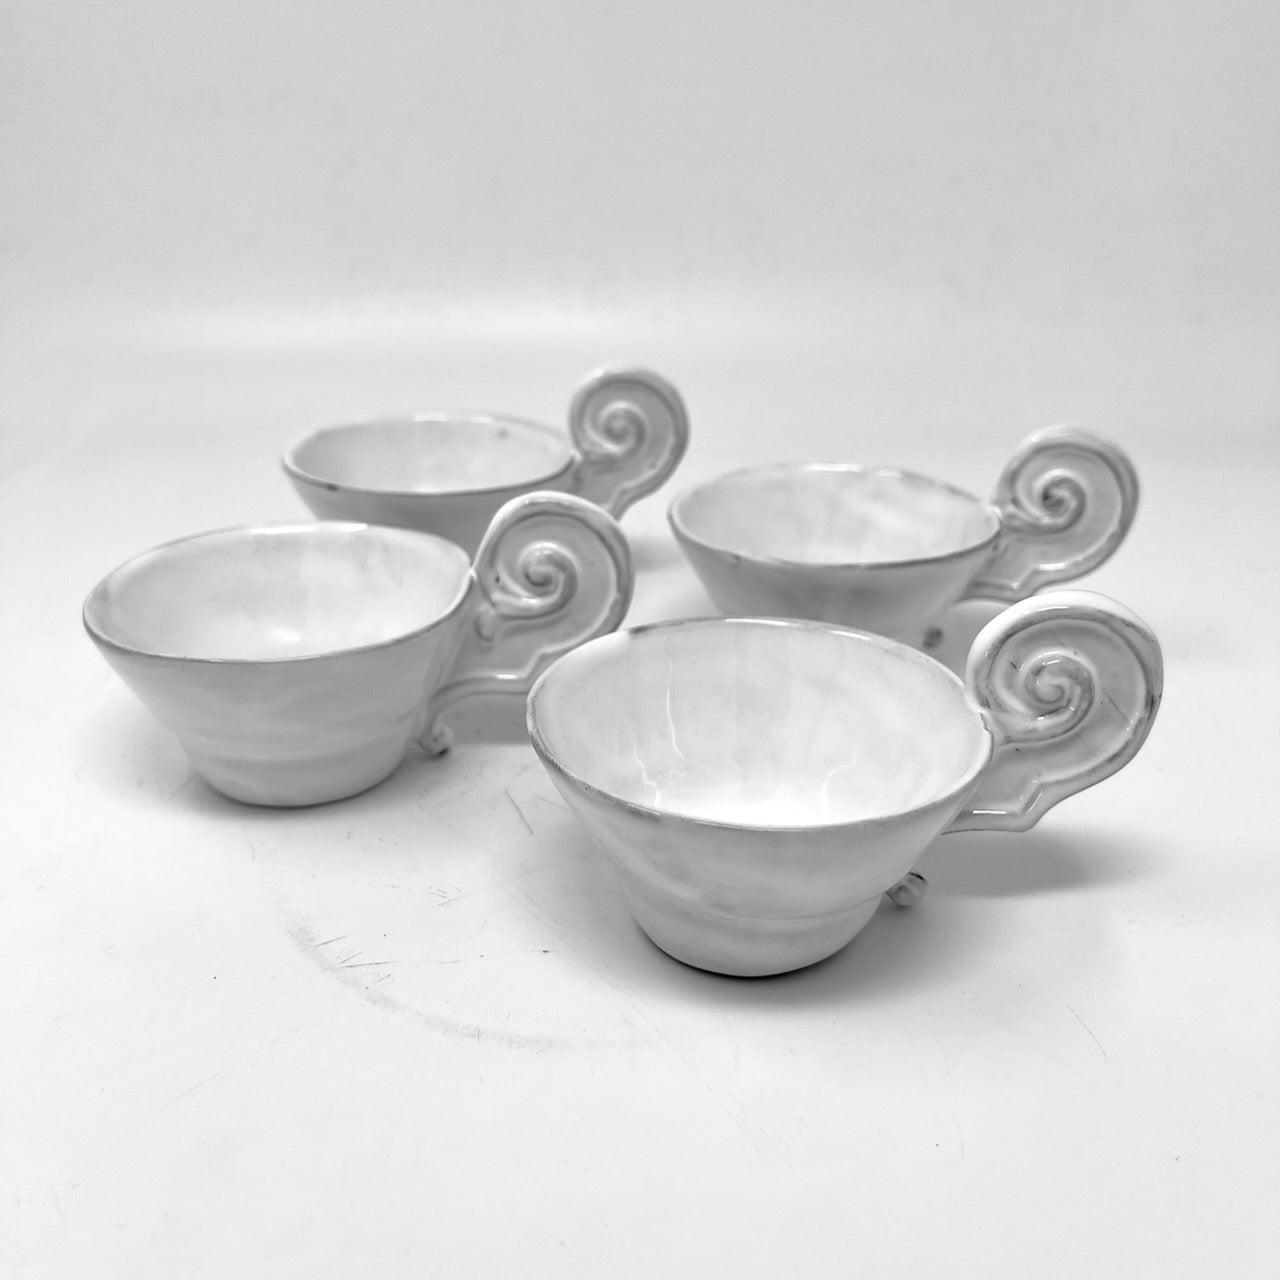 4x Mademoiselle cup with Paris handle